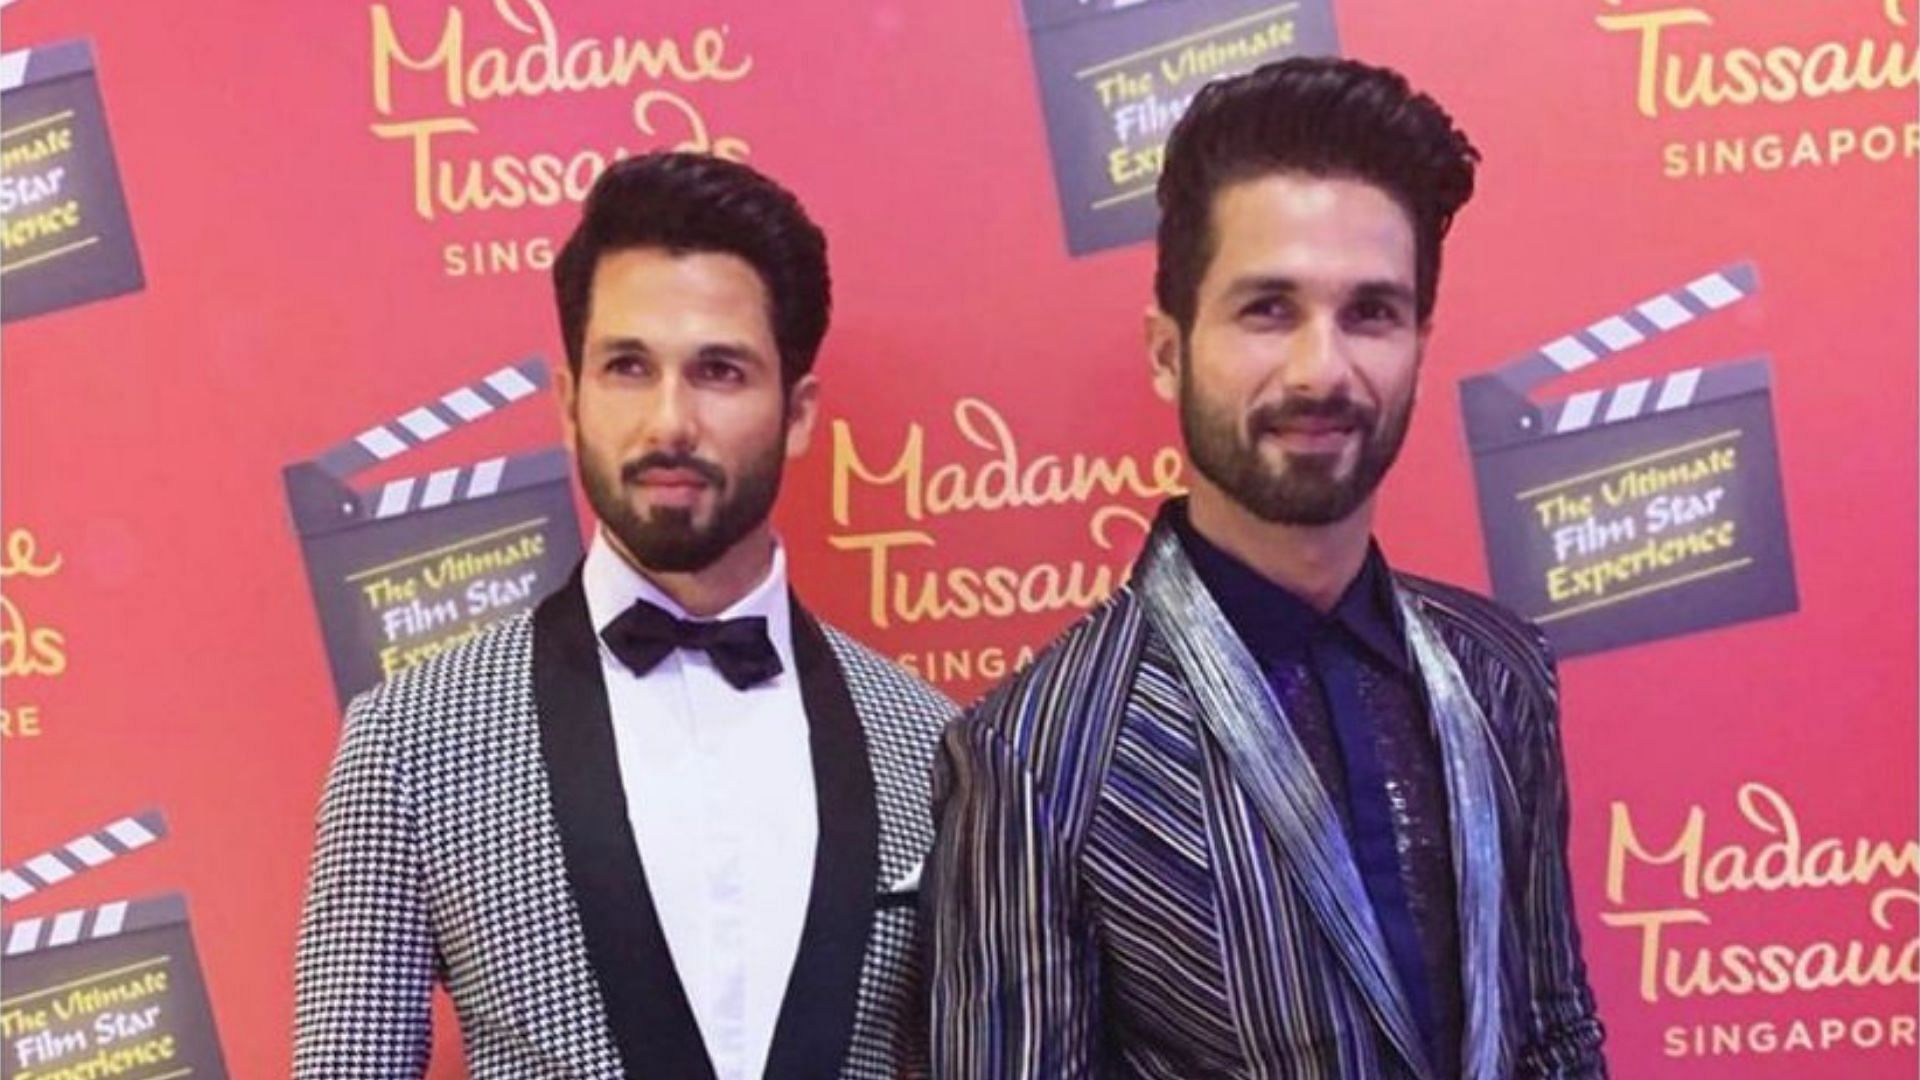 Shahid Kapoor poses next to his wax statue at Madame Tussauds Singapore.